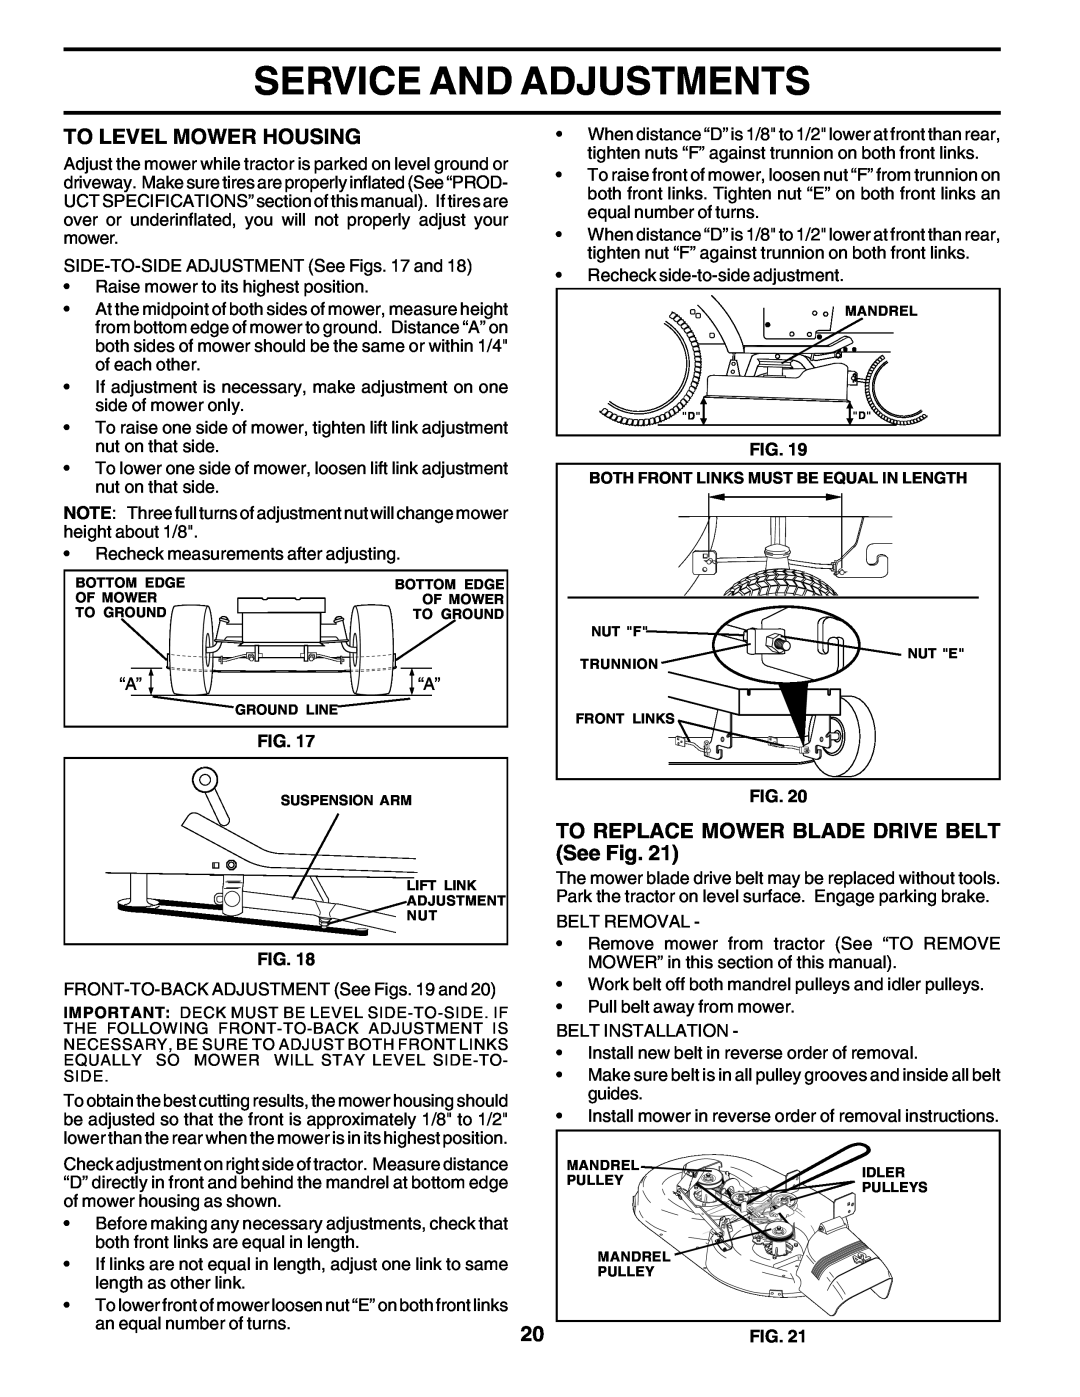 Poulan 179416 manual Service And Adjustments, To Level Mower Housing, TO REPLACE MOWER BLADE DRIVE BELT See Fig 